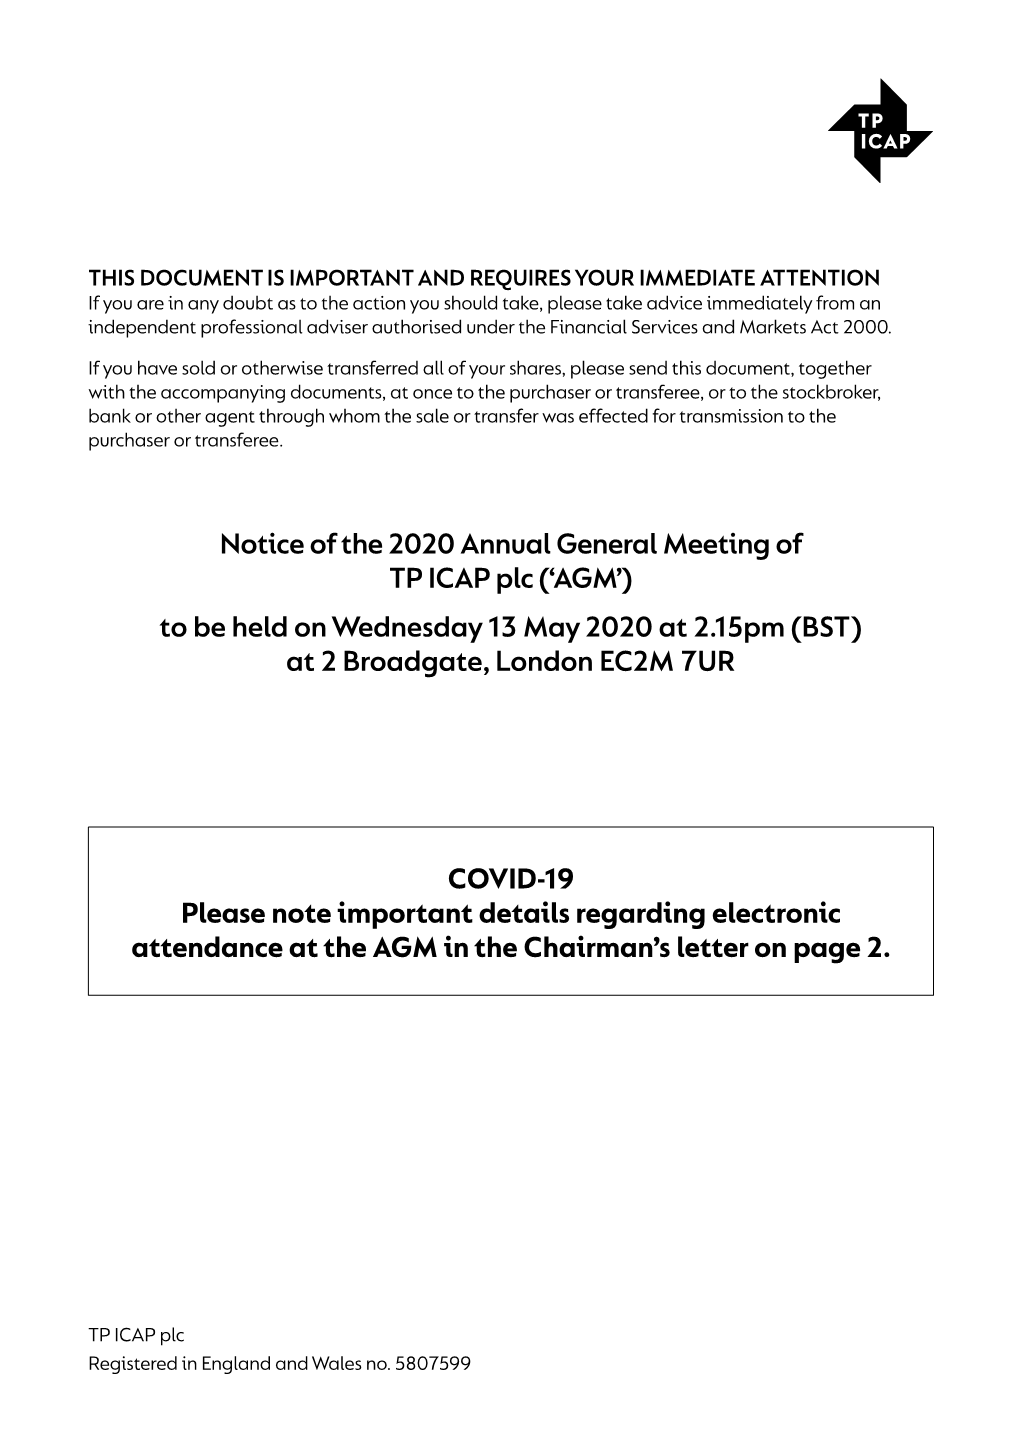 Notice of the 2020 Annual General Meeting of TP ICAP Plc ('AGM') To